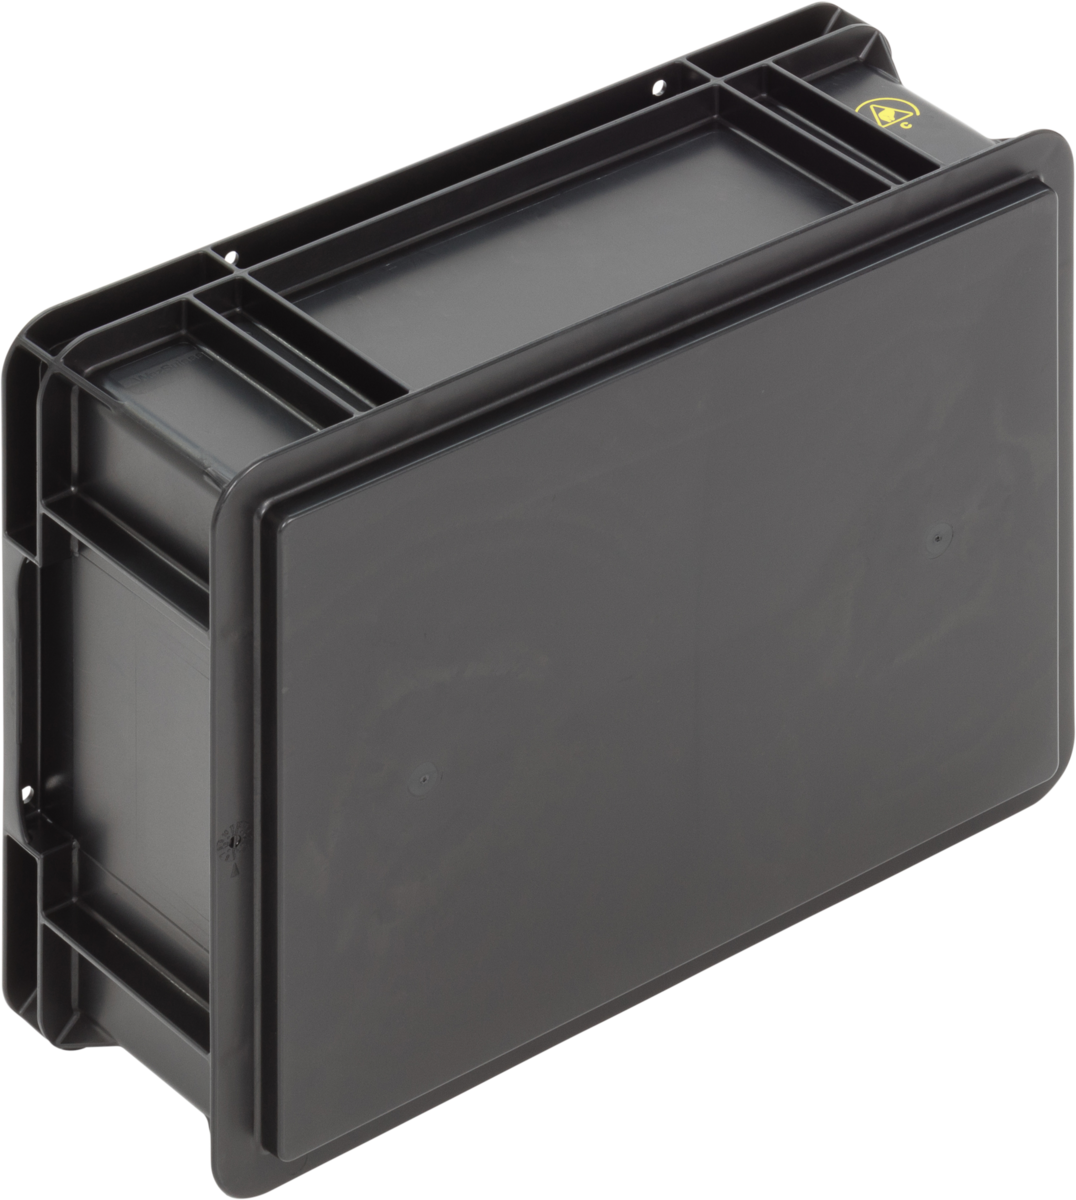 ESD-Safe-SGL-Norm-Stacking-Bin-Containers-Flat-Base-Ref.-4313.907.992_1004385_400x300x145_02